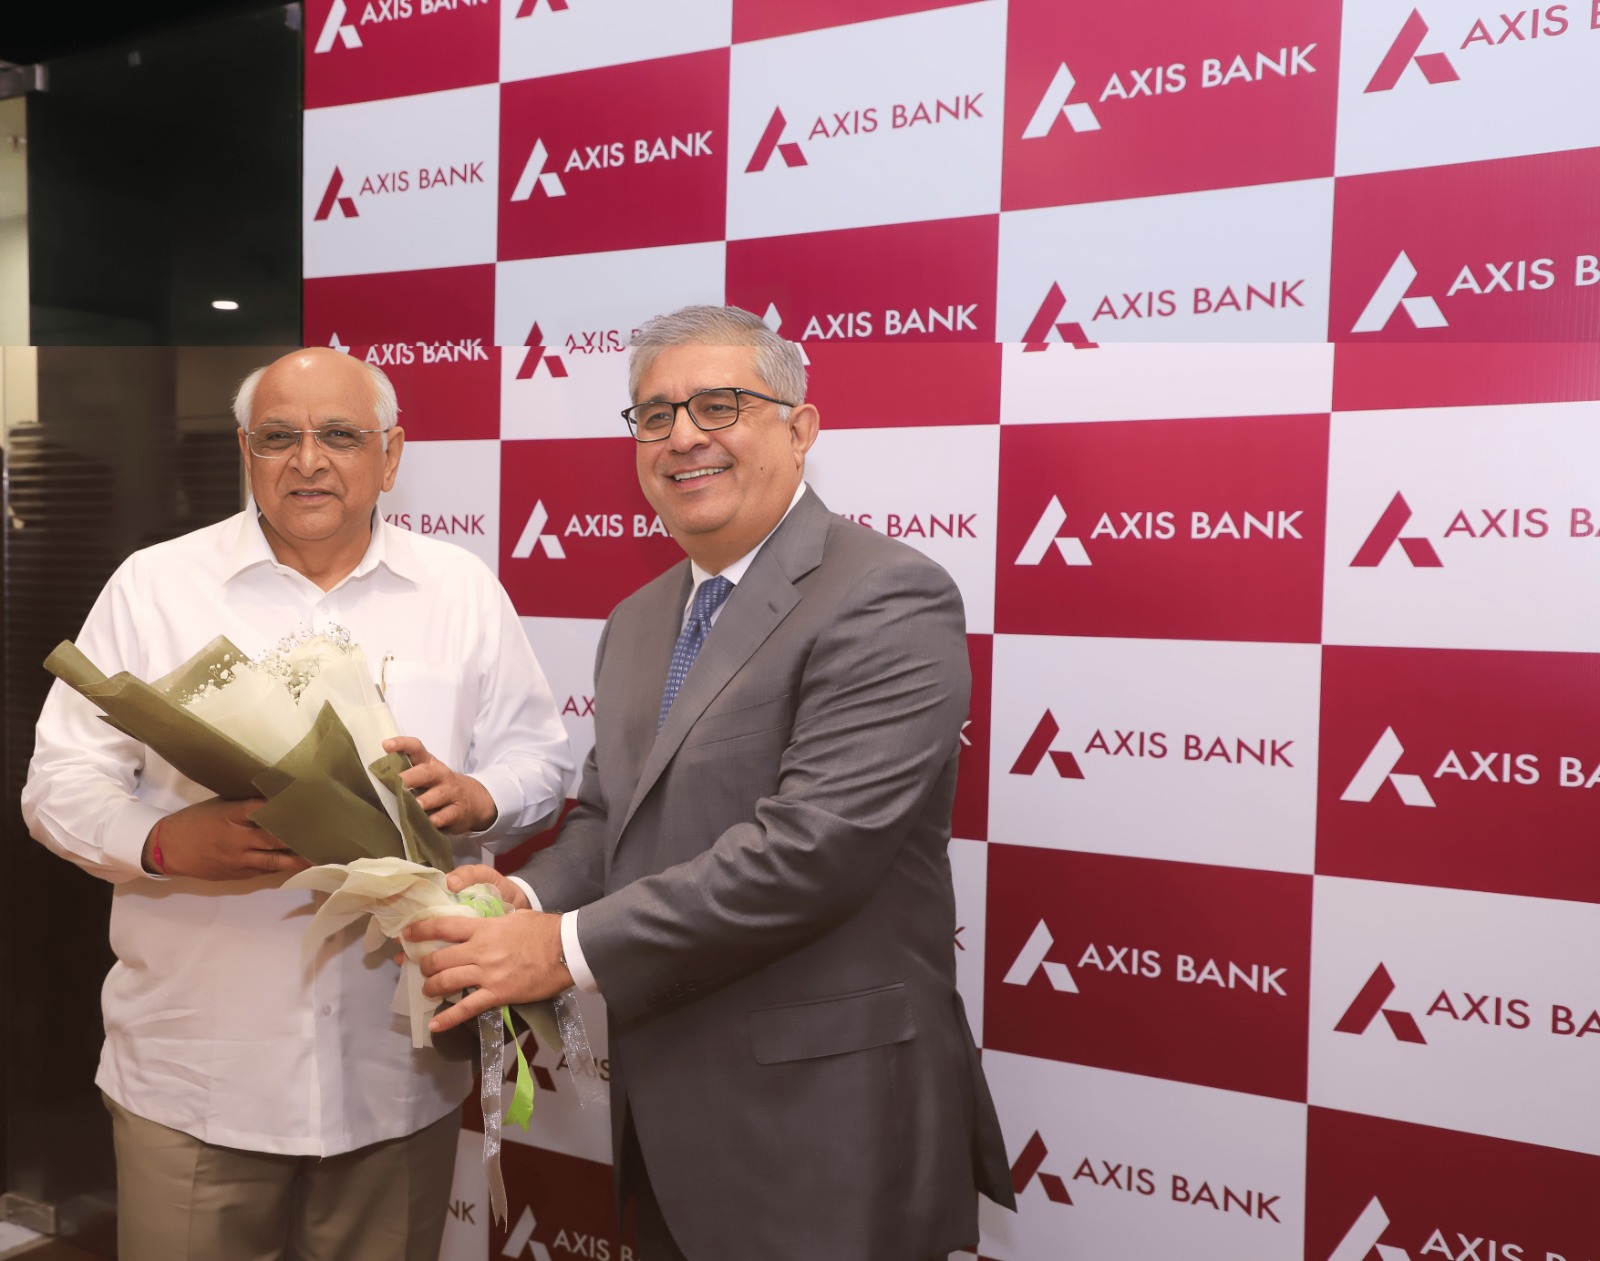 Axis Bank launches ‘NEO for Business’, a mobile-first Business Banking proposition for MSMEs